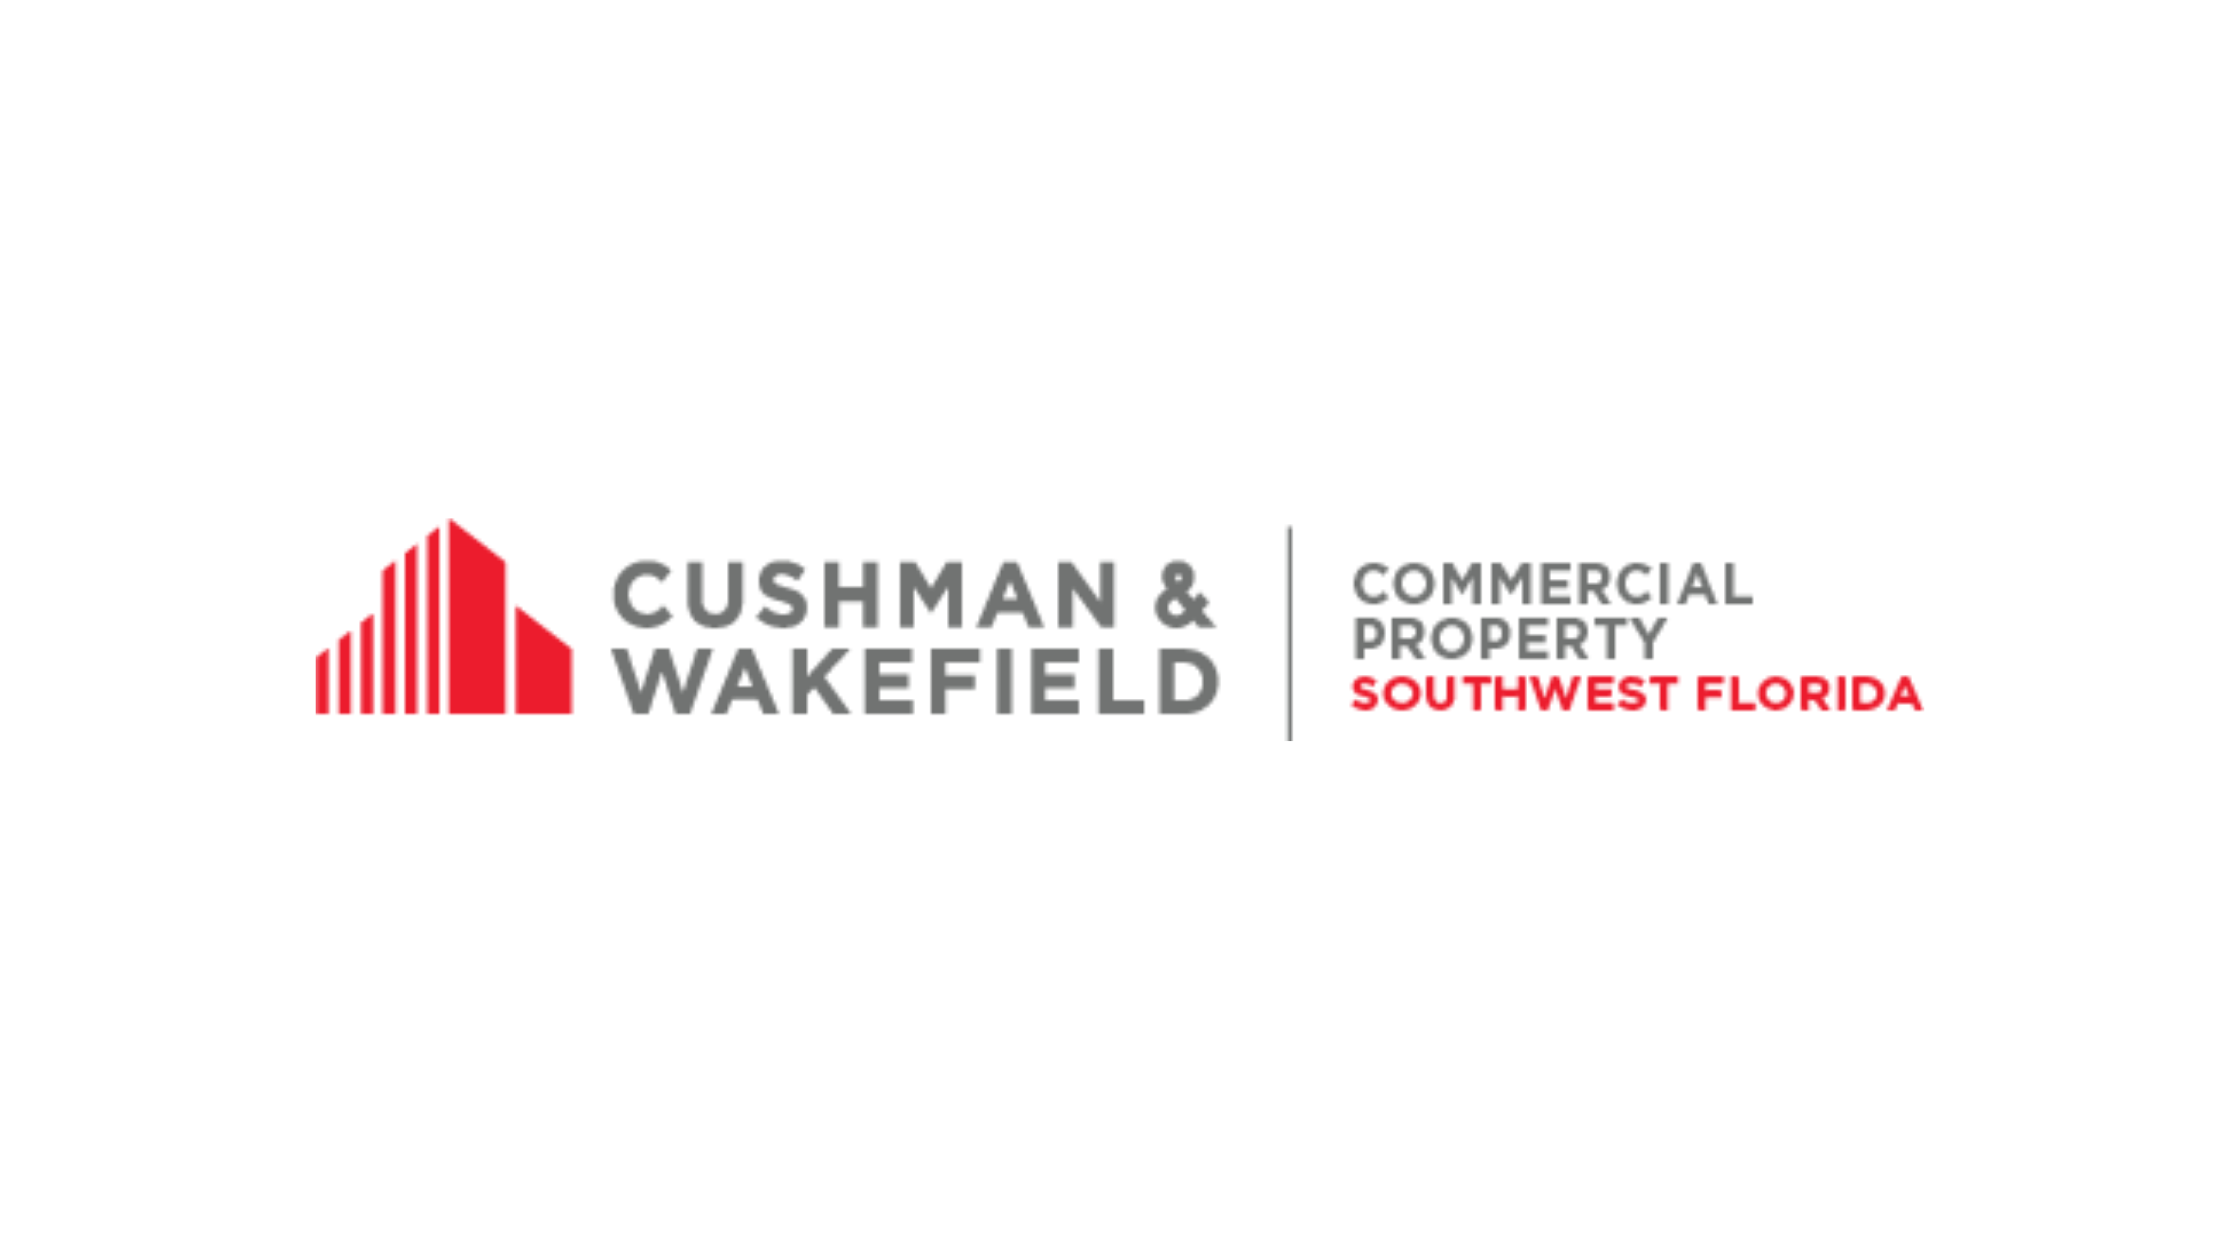 Cushman & Wakefield | Commercial Property Southwest Florida brokers $830,000 sale of industrial land in Labelle